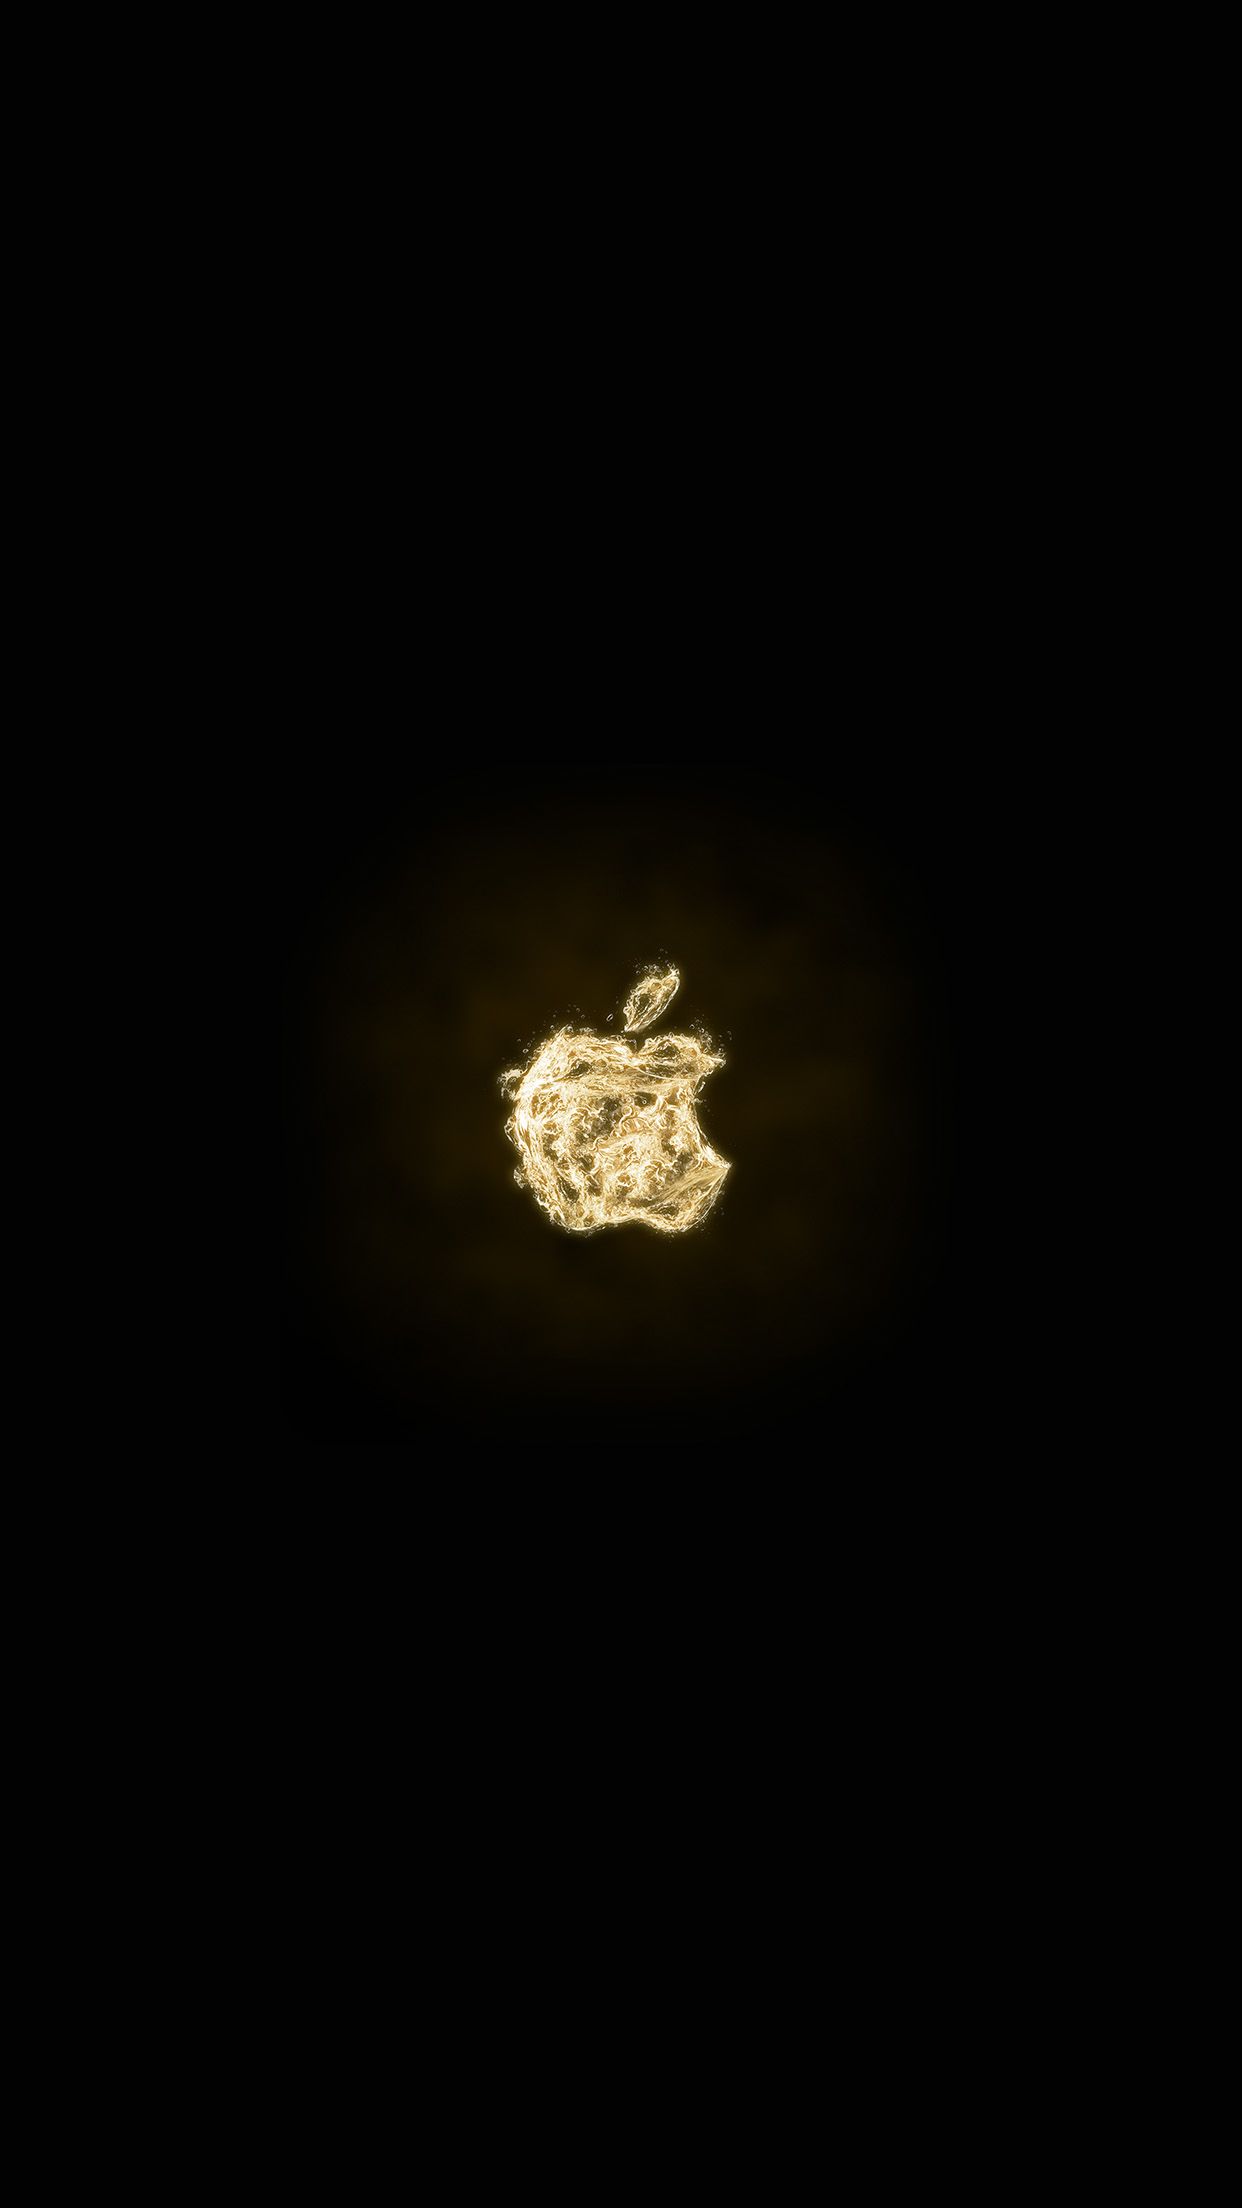 49+] Black and Gold iPhone Wallpaper